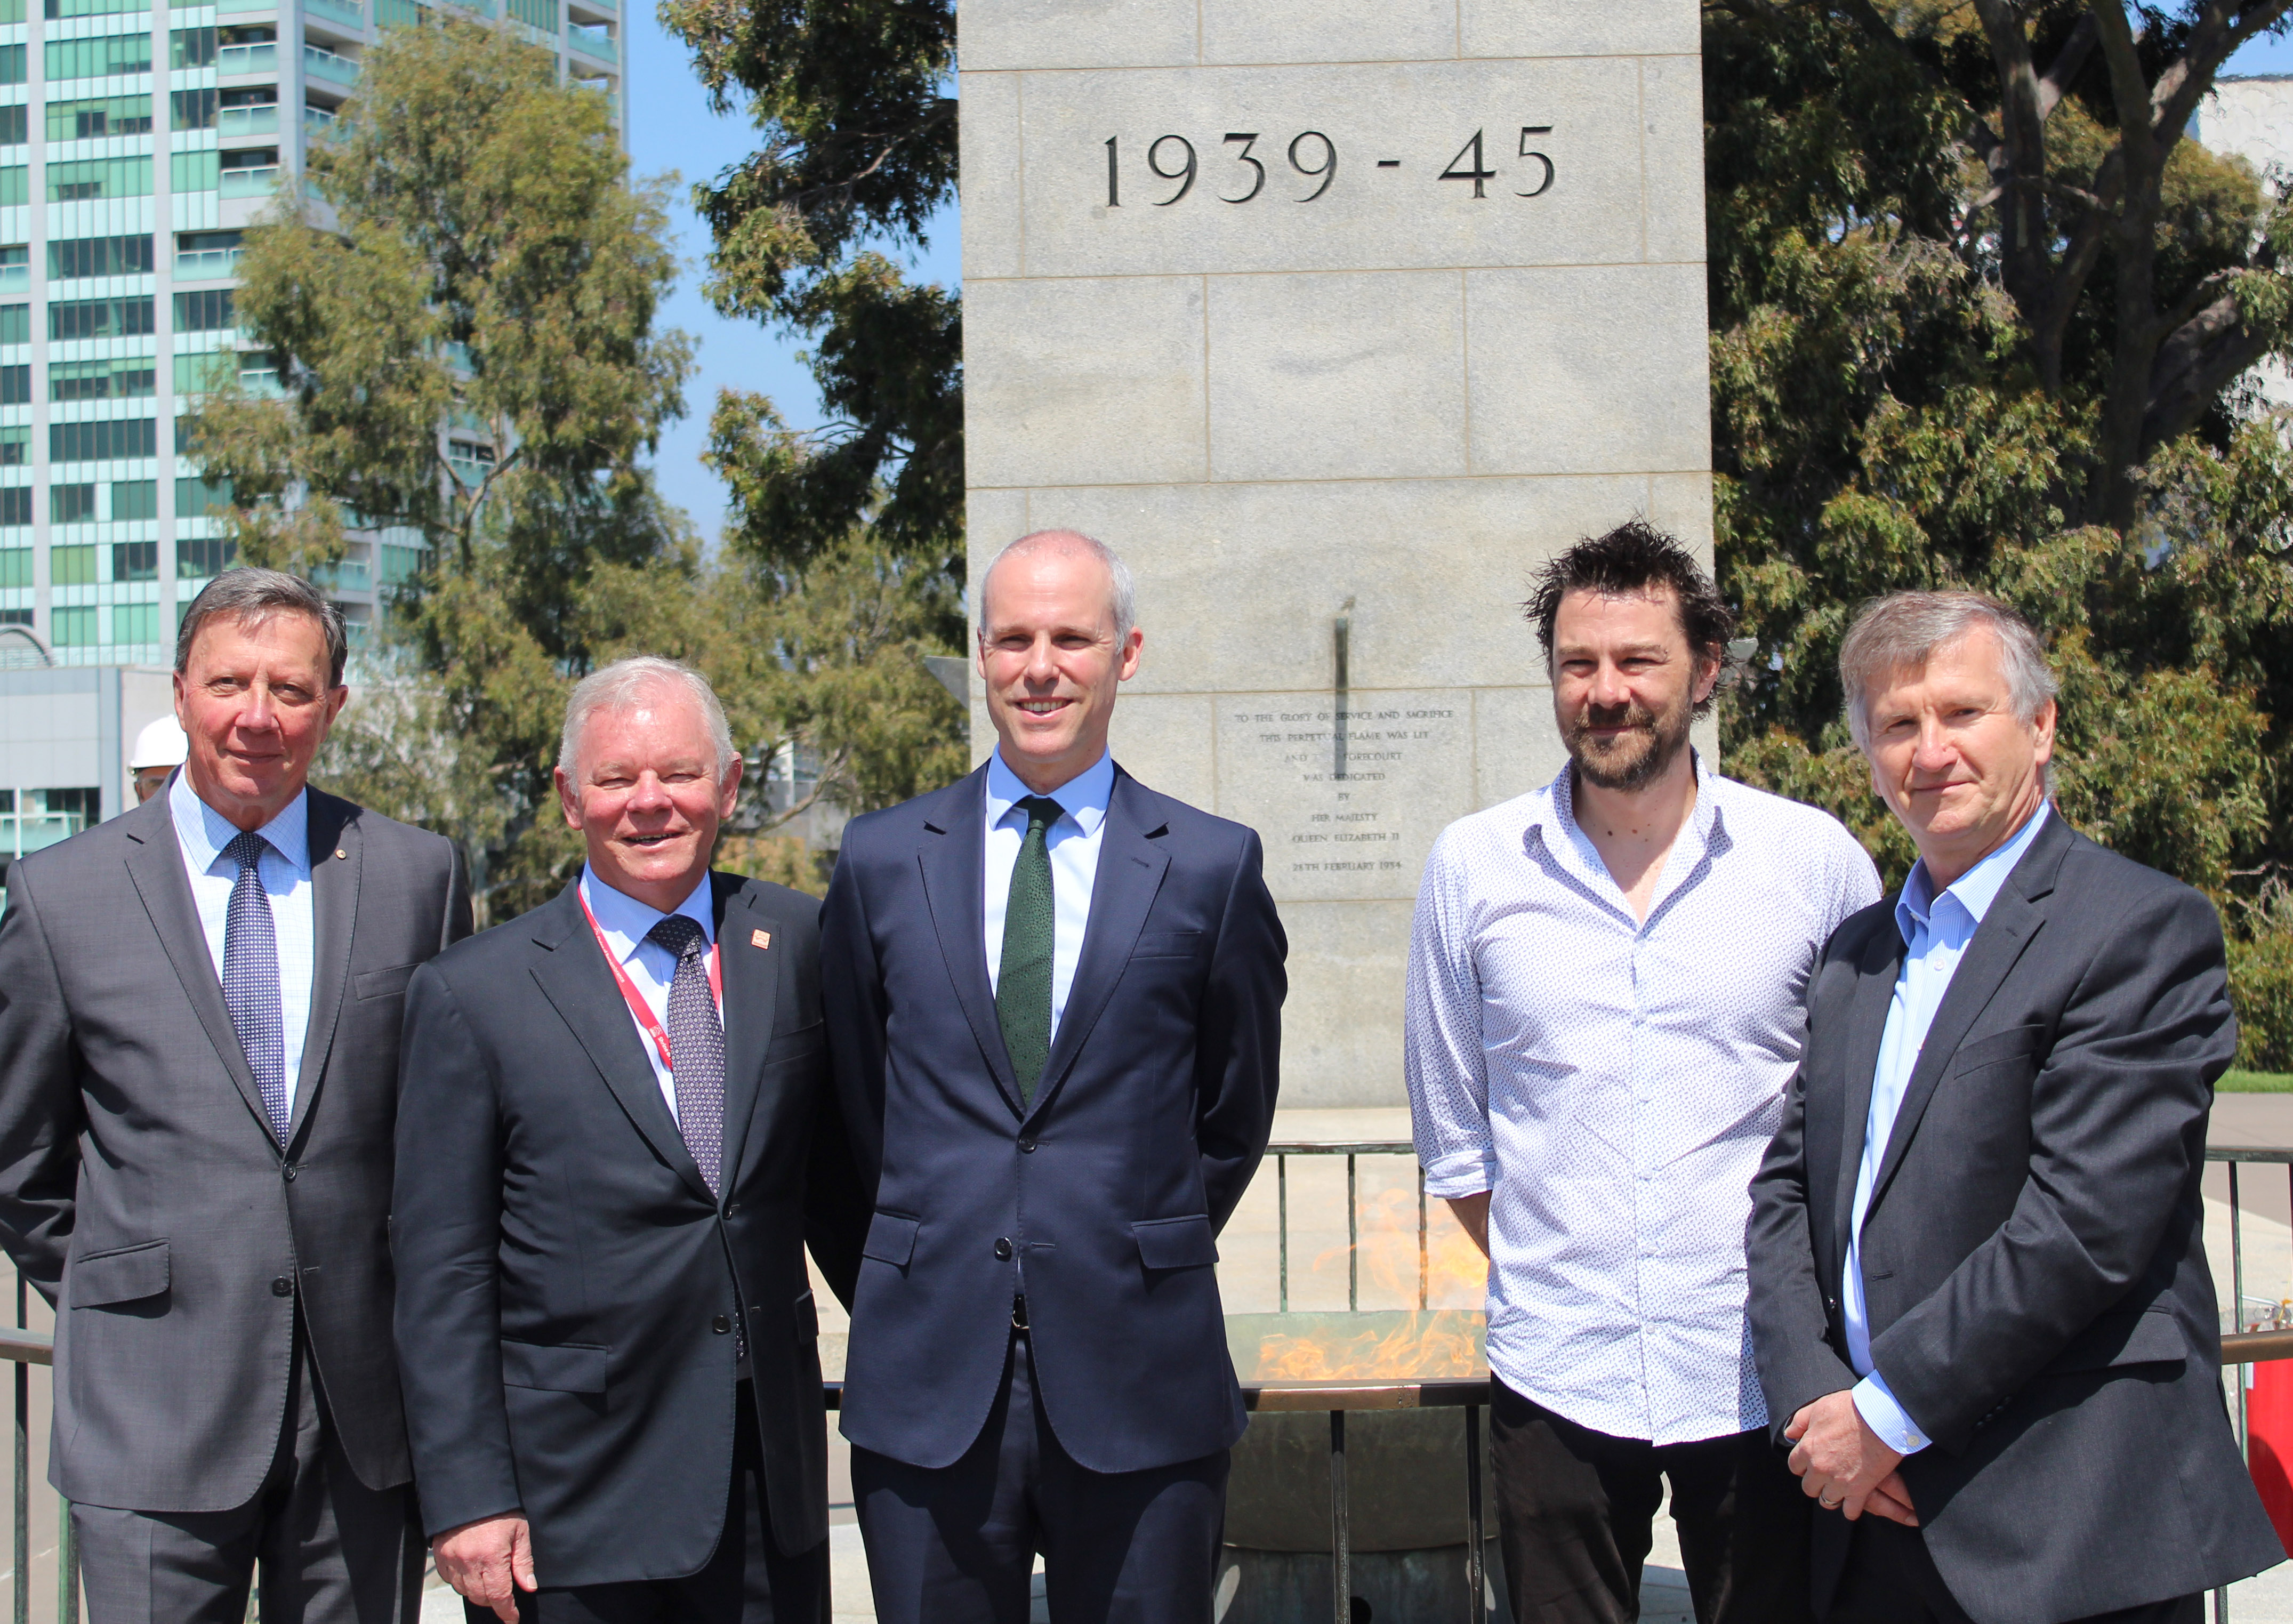 A successful collaboration: Shrine Trustees chairman Air Vice-Marshal Chris Spence AO, Shrine CEO Dean Lee and Multinet Gas CEO Ben Wilson with RMIT's Paul Porter and Milan Brandt.